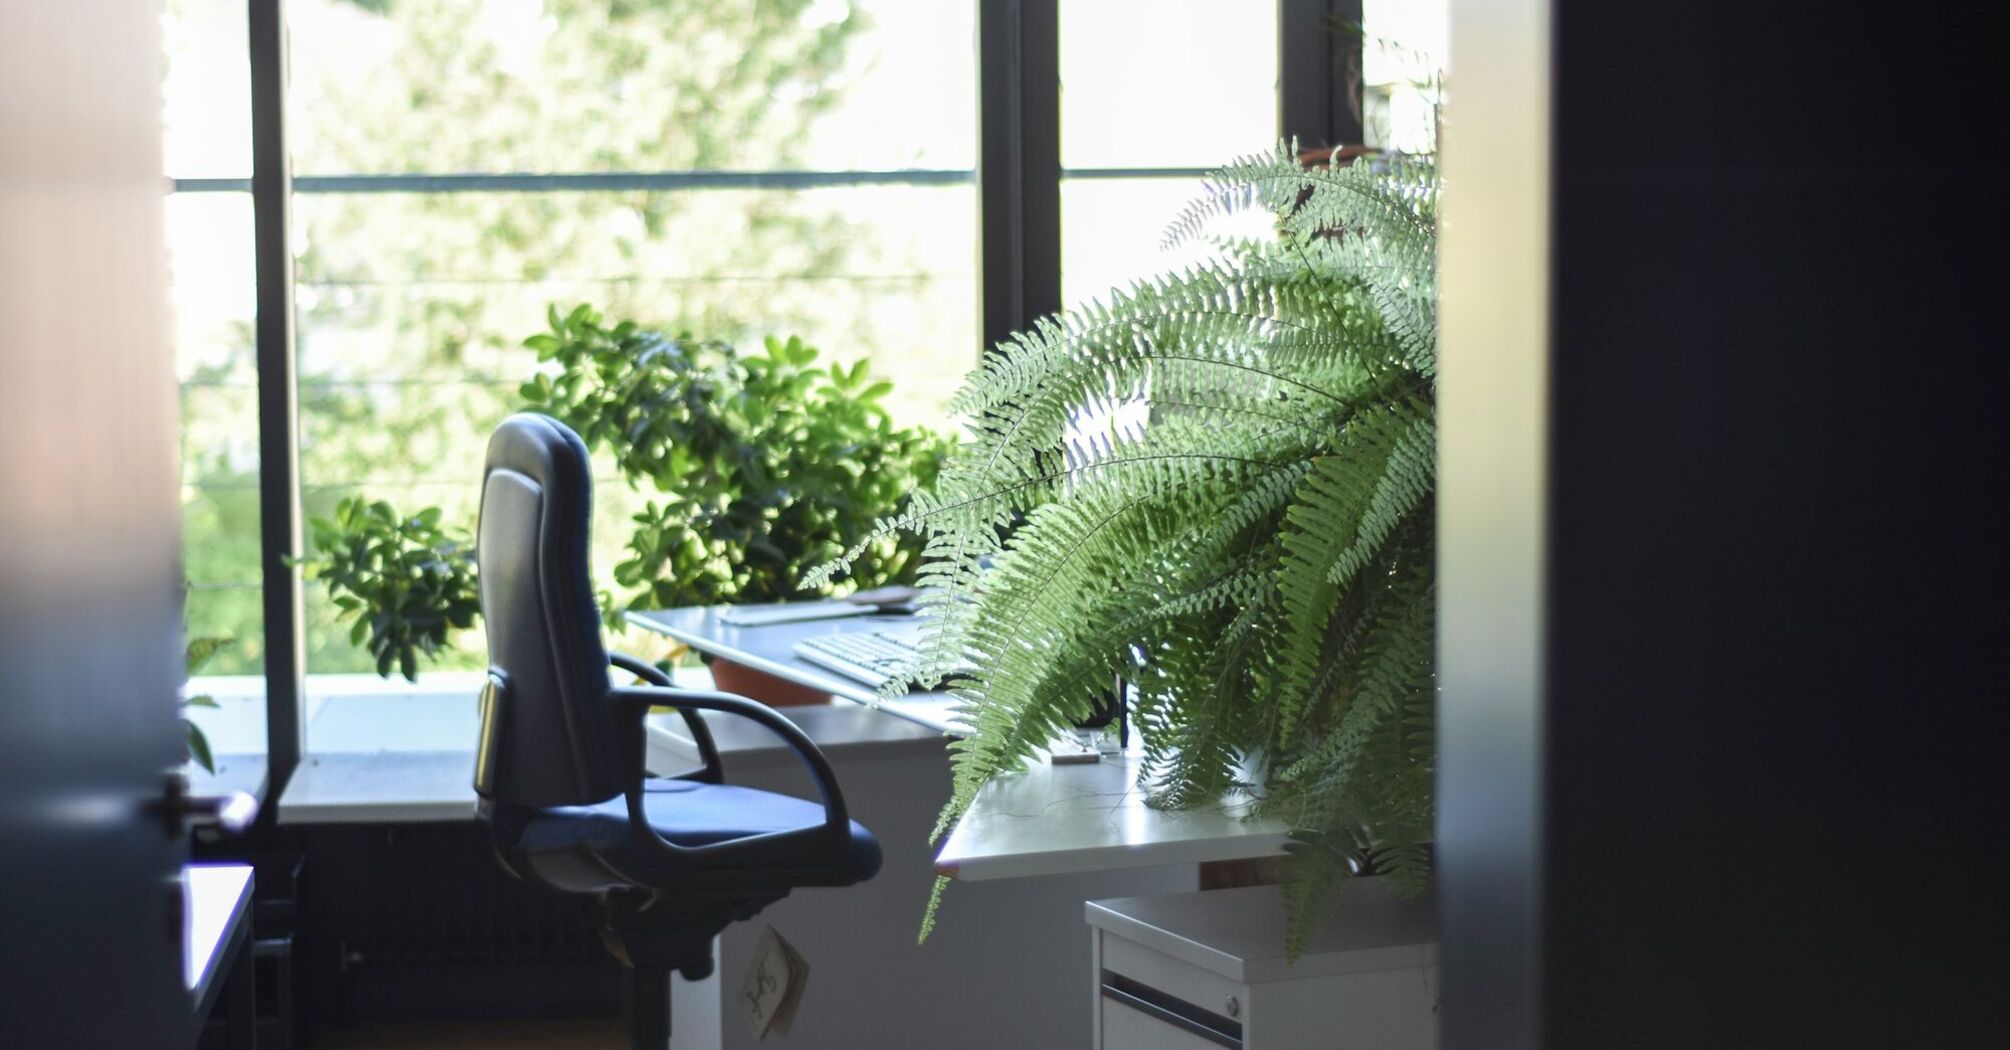 A serene office space with a lush fern, comfortable desk chair, and a view of greenery through a bright window, promoting a calm work environment